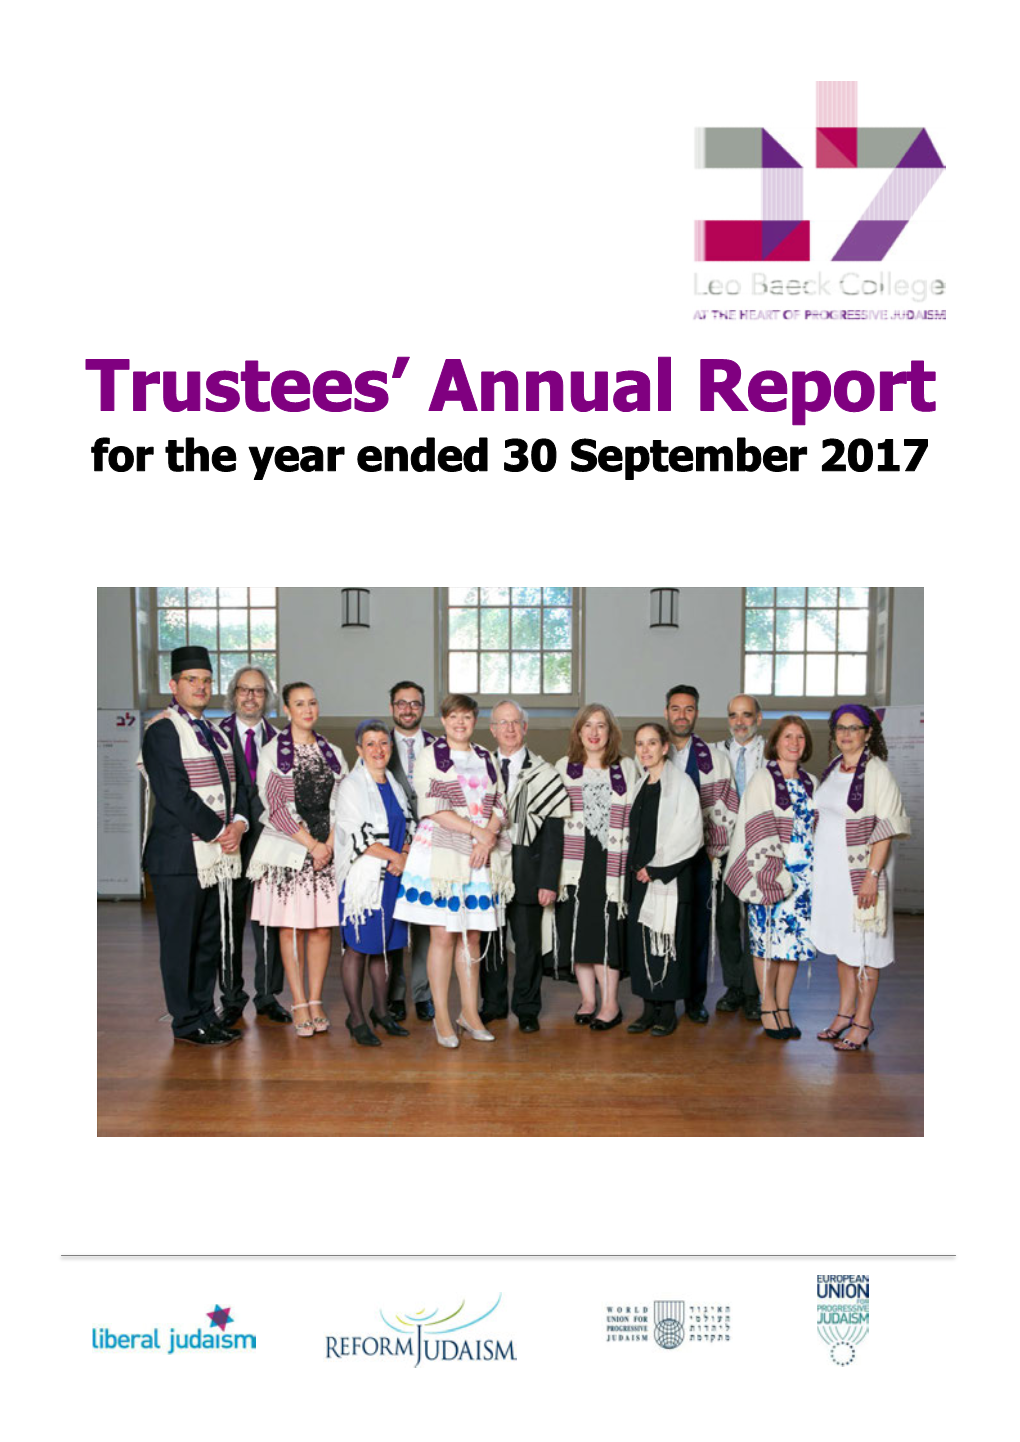 LBC Trustees Report 2016-17 Audited with Pictures 90418